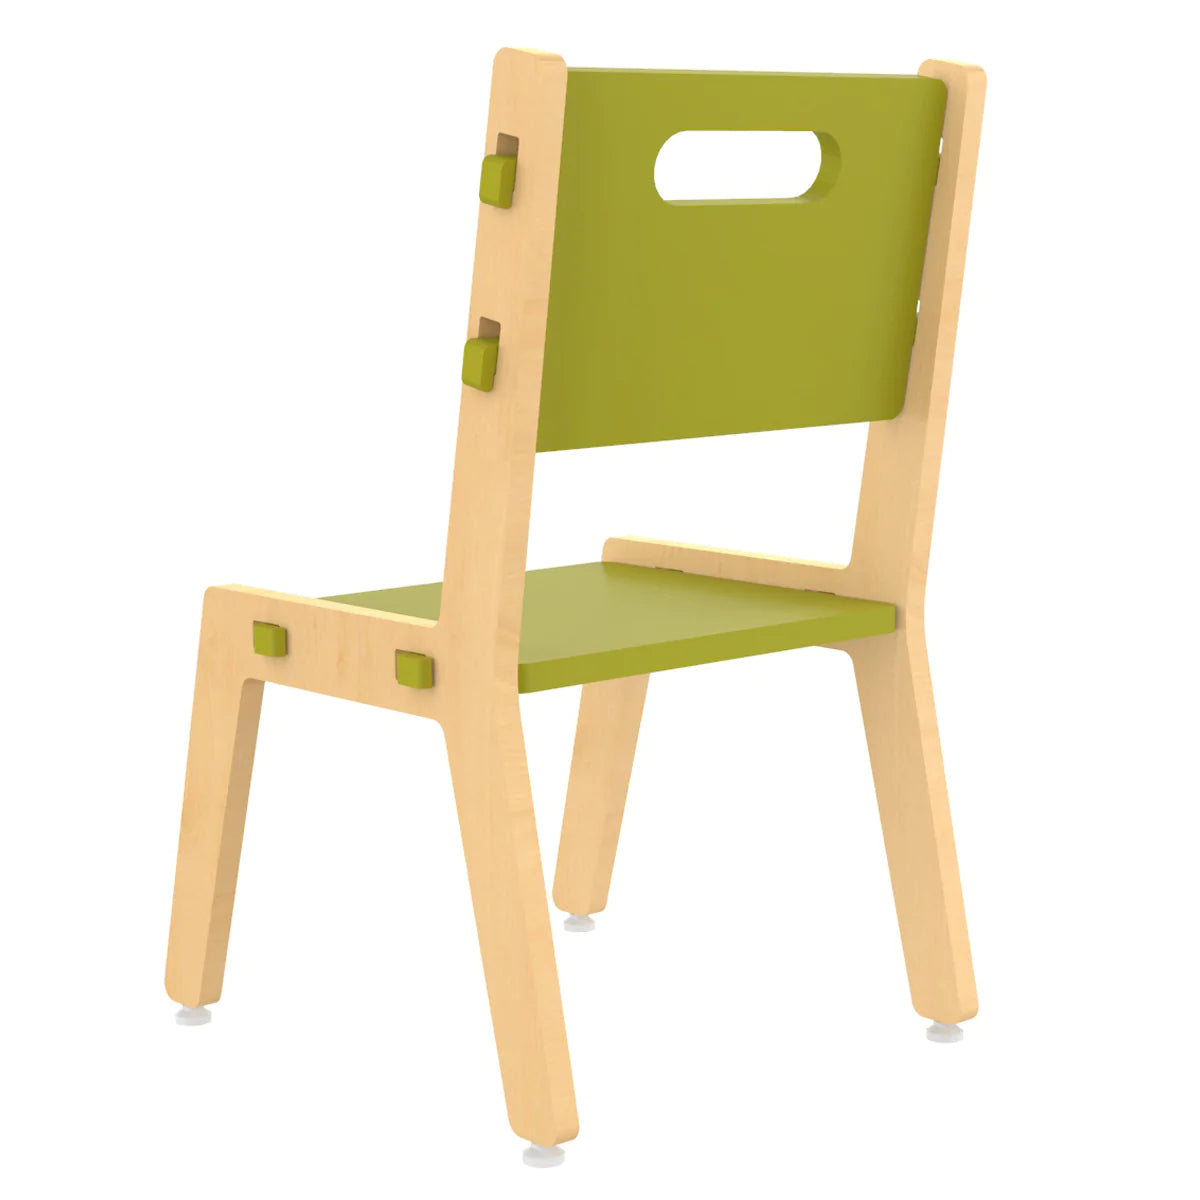 Buy Grey Guava Wooden Chair - Green - Back View - SkilloToys.com